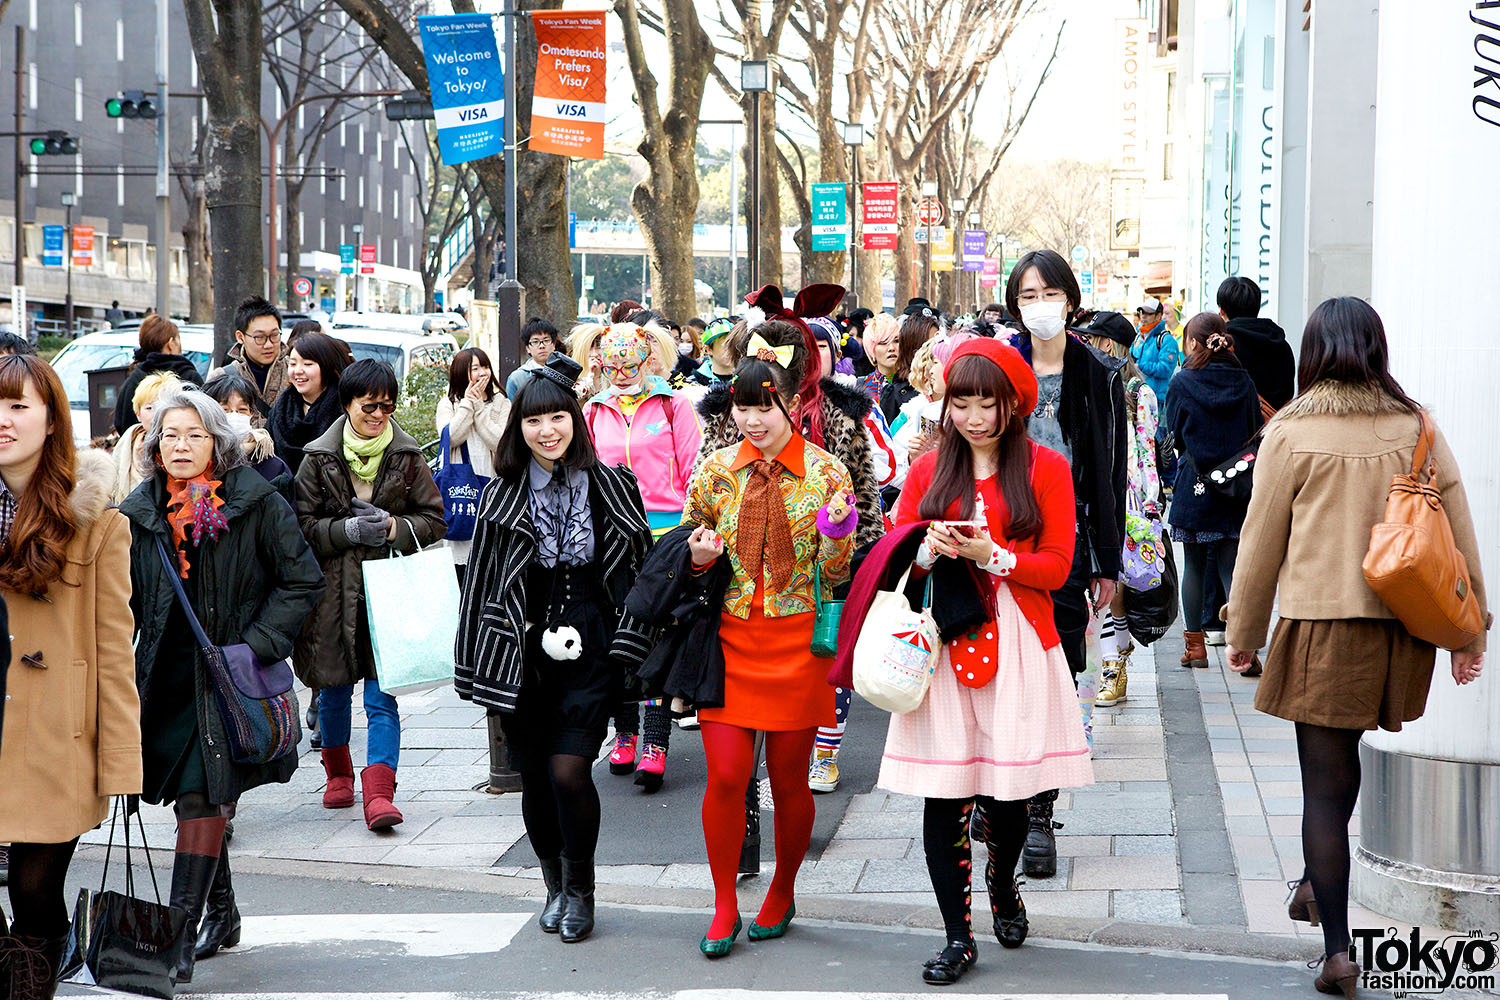 Download this Full Details Harajuku Fashion Walk Kawaii Street Style Pictures picture